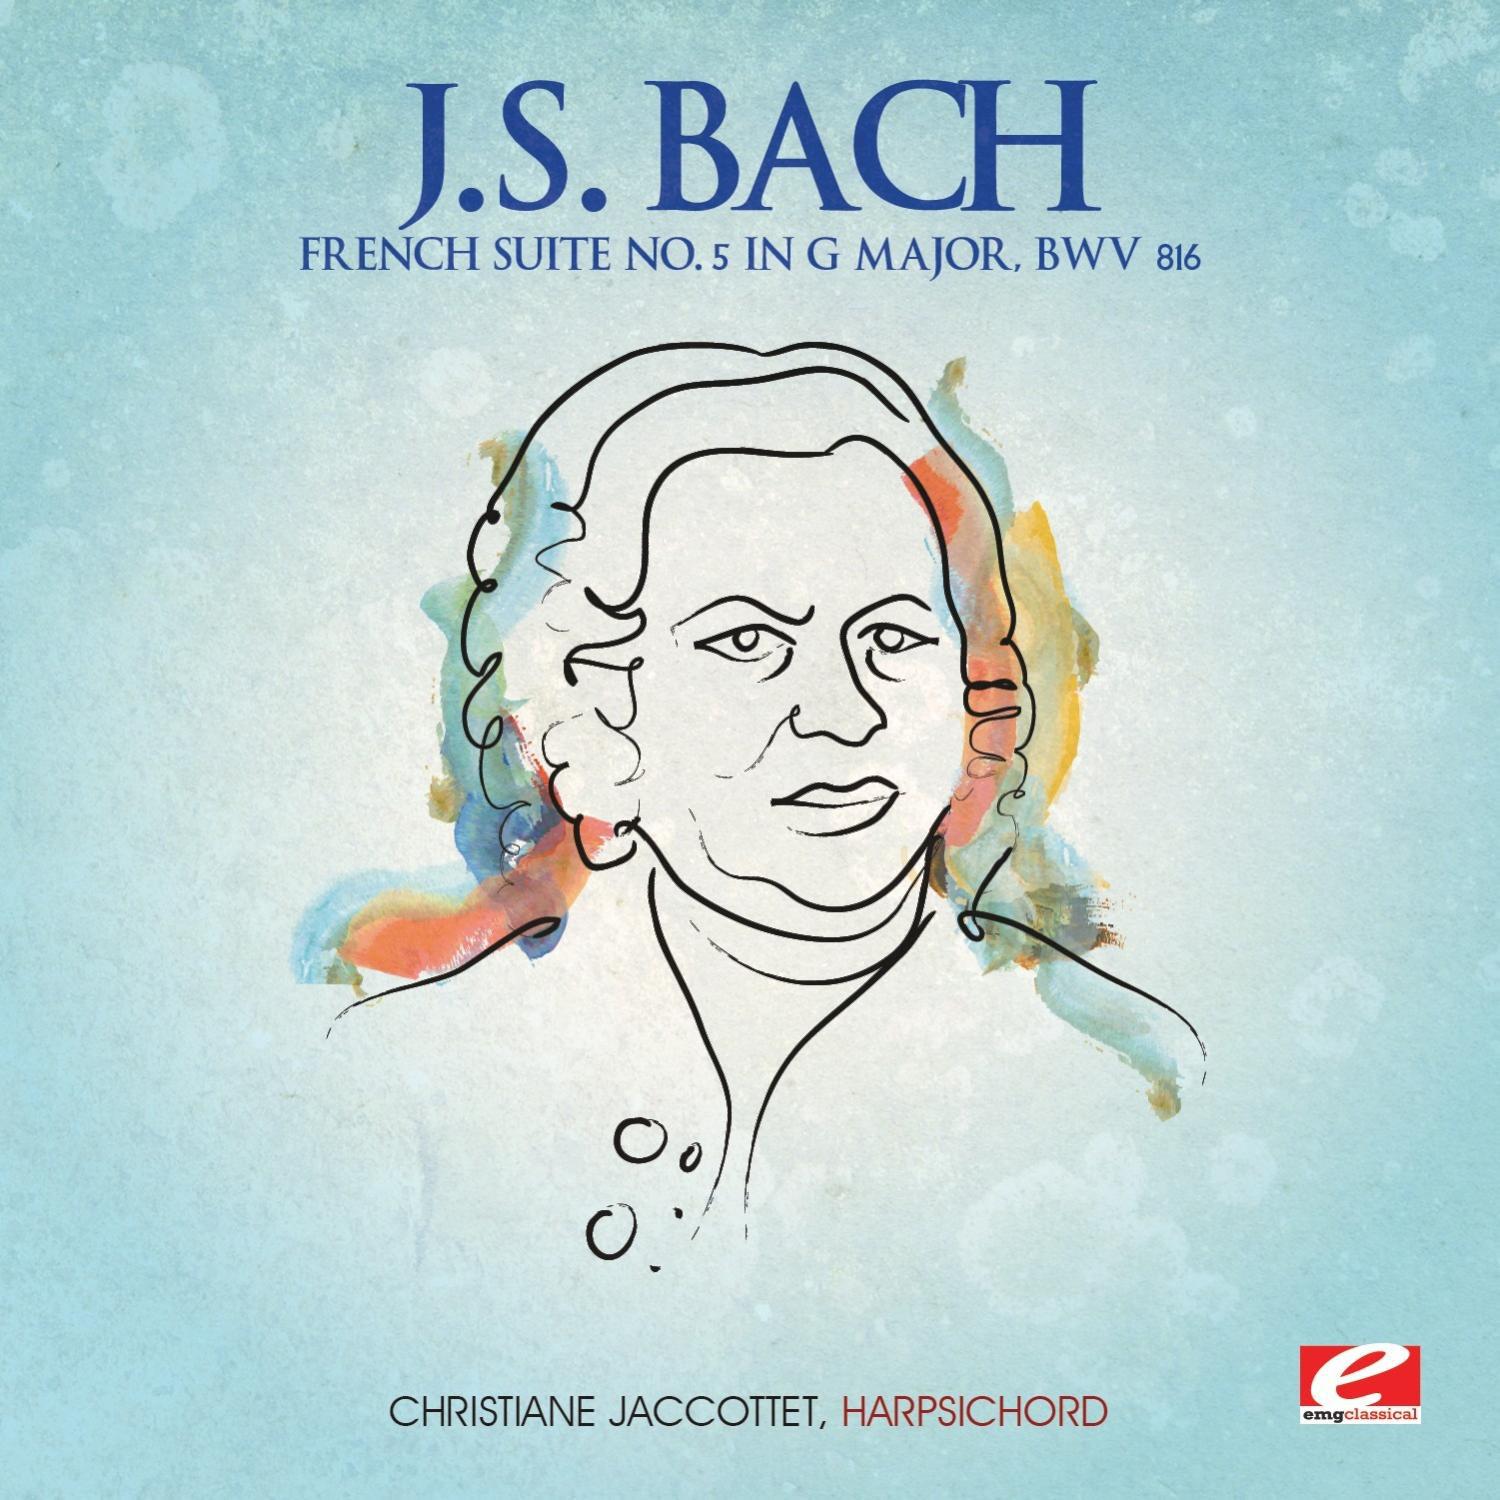 French Suite No. 5 in G Major, BWV 816: Allemande